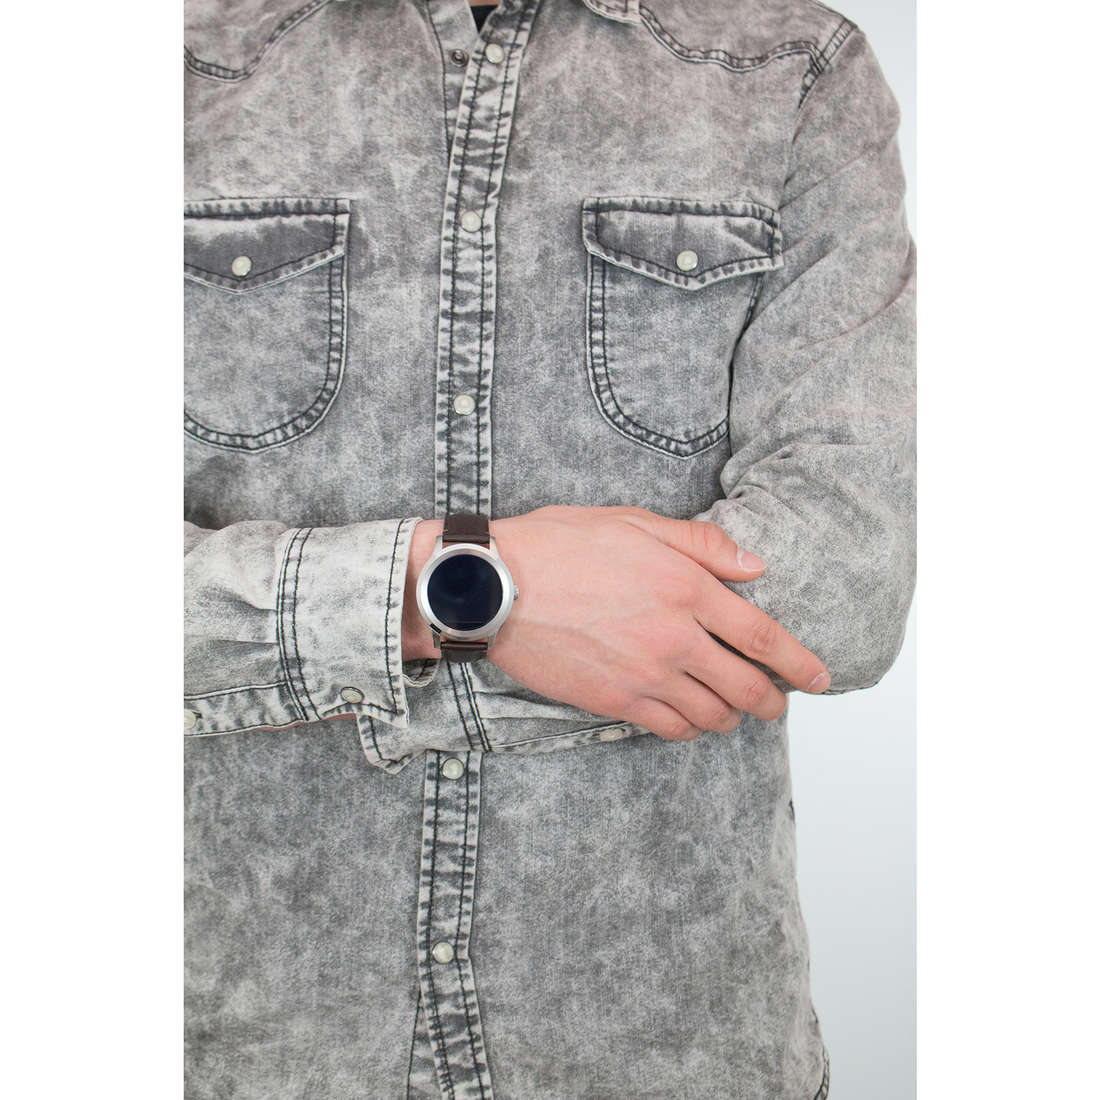 Fossil Smartwatches Q Founder uomo FTW2119 indosso